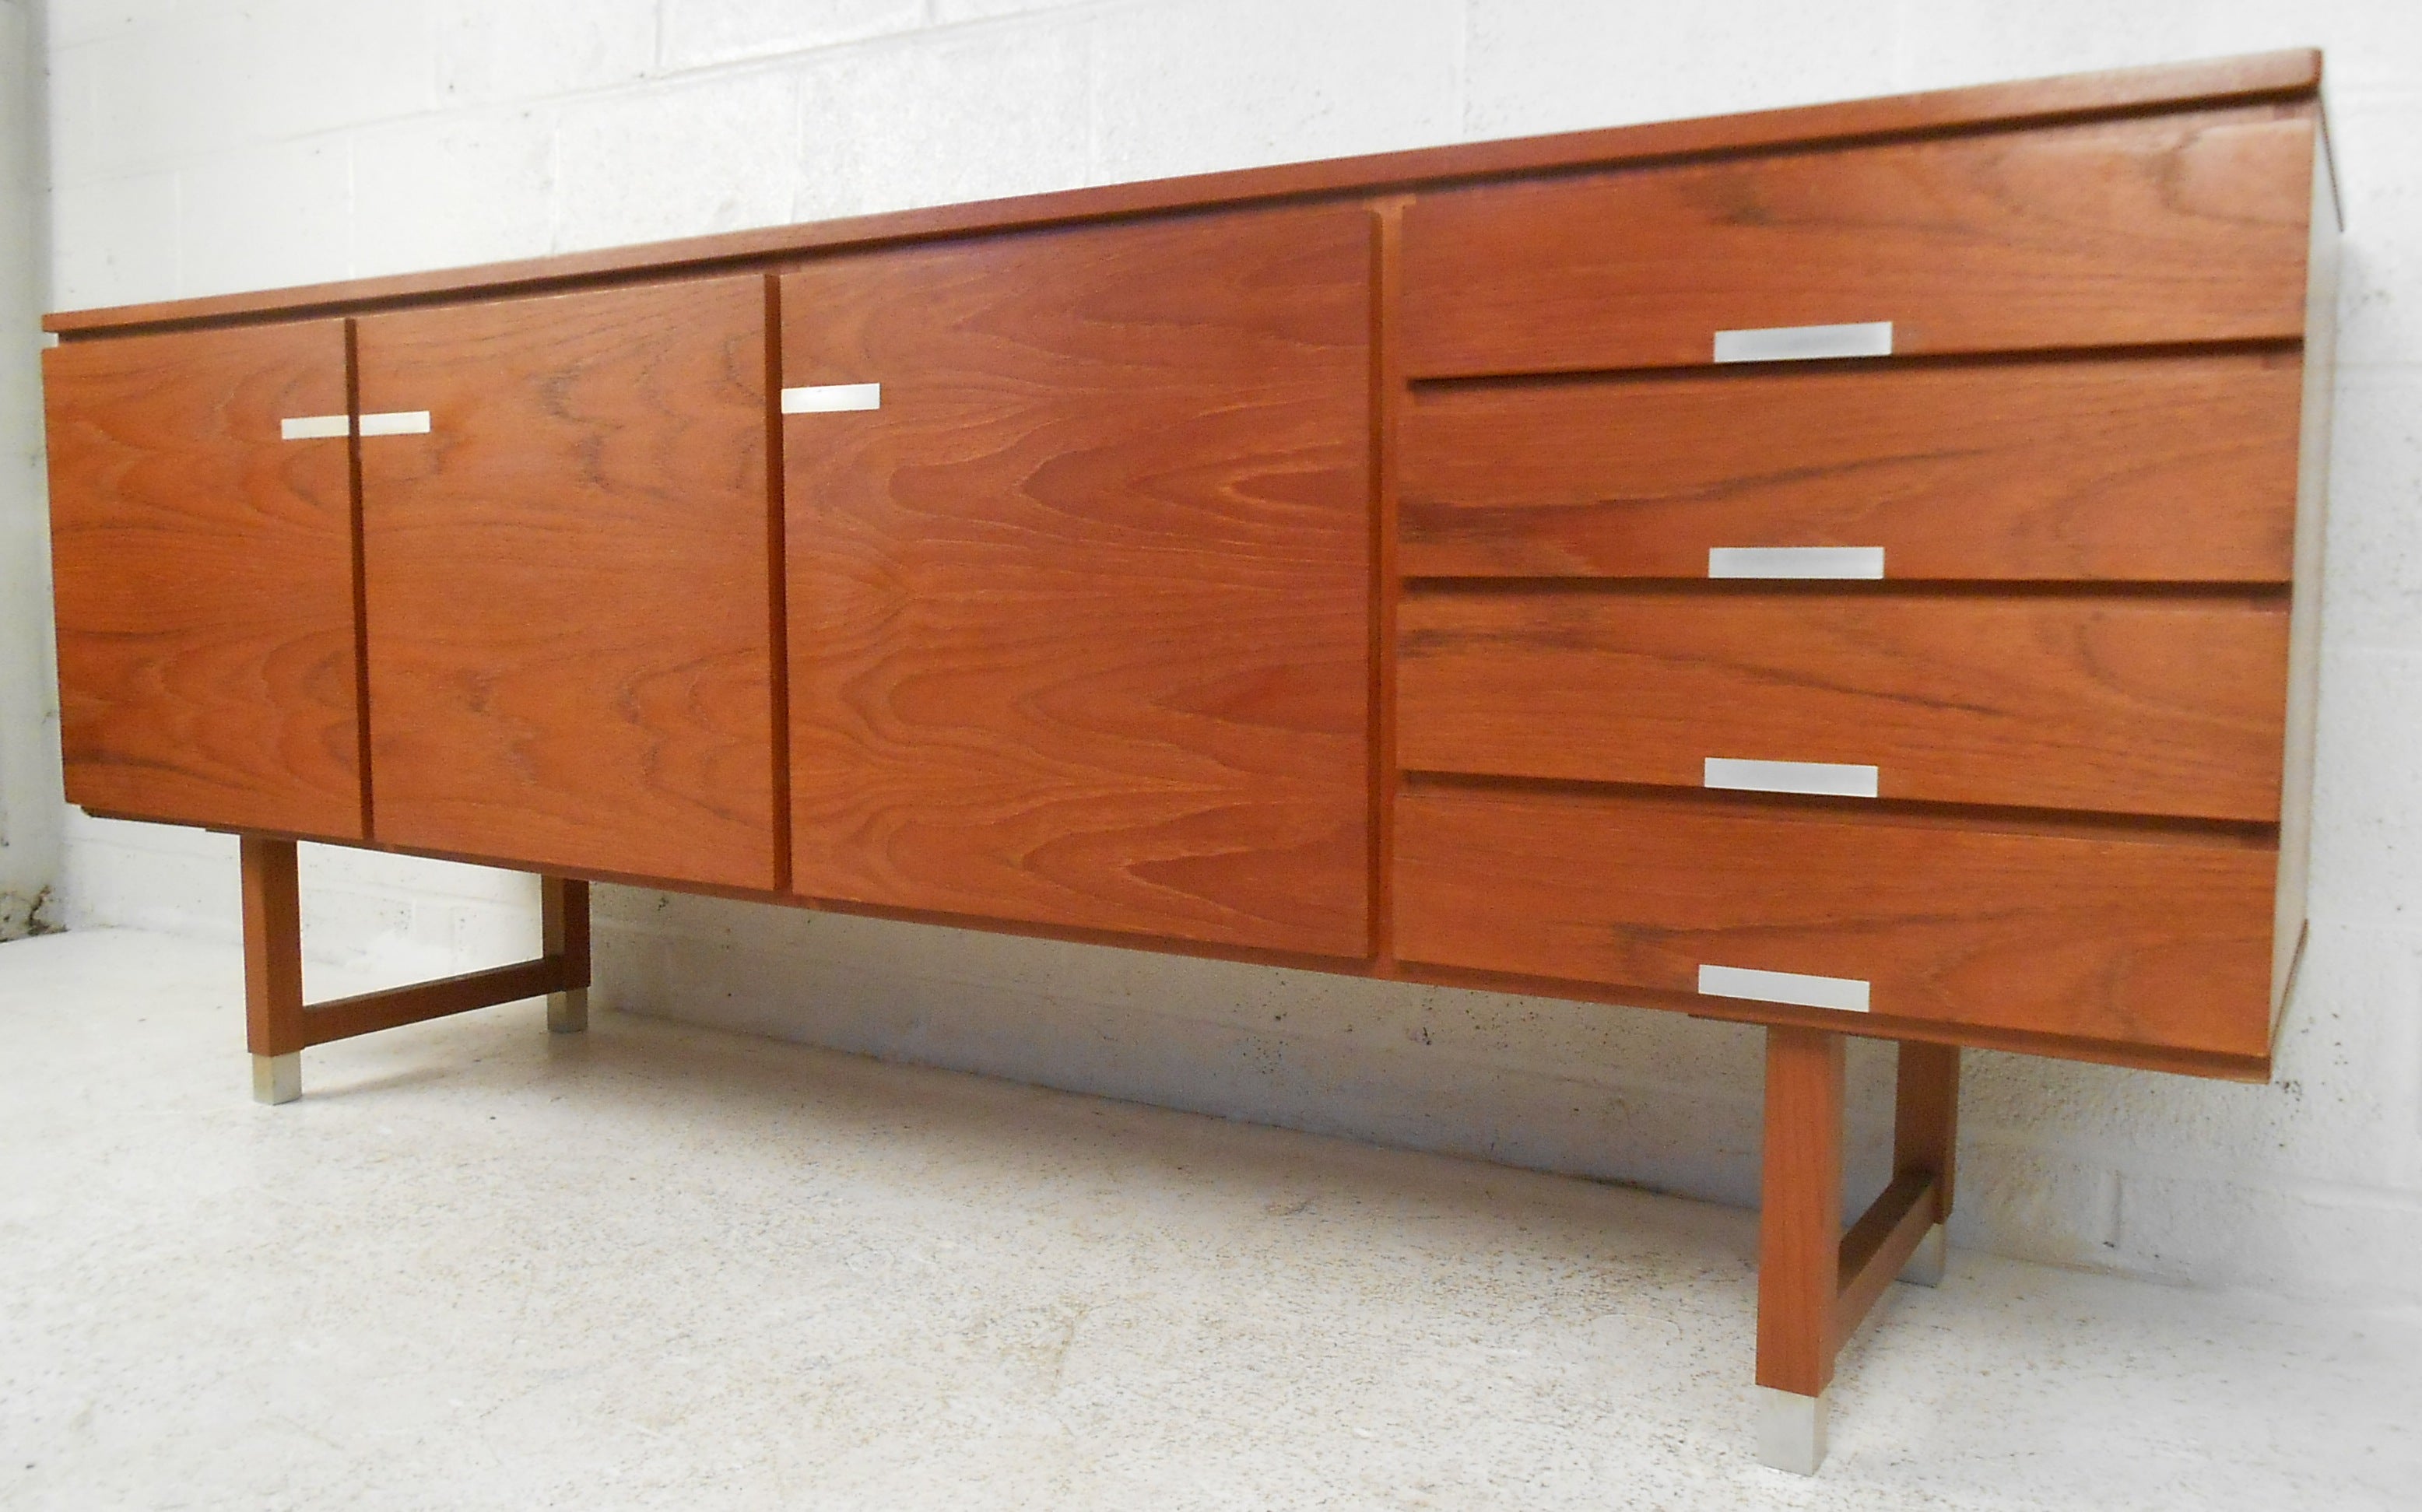 Long teak server by Kai Kristiansen featuring four drawers and three doors with adjustable shelving makes the perfect storage piece for any modern home. Midcentury design is evidenced in the high quality manufacturing, unique metal trim, and